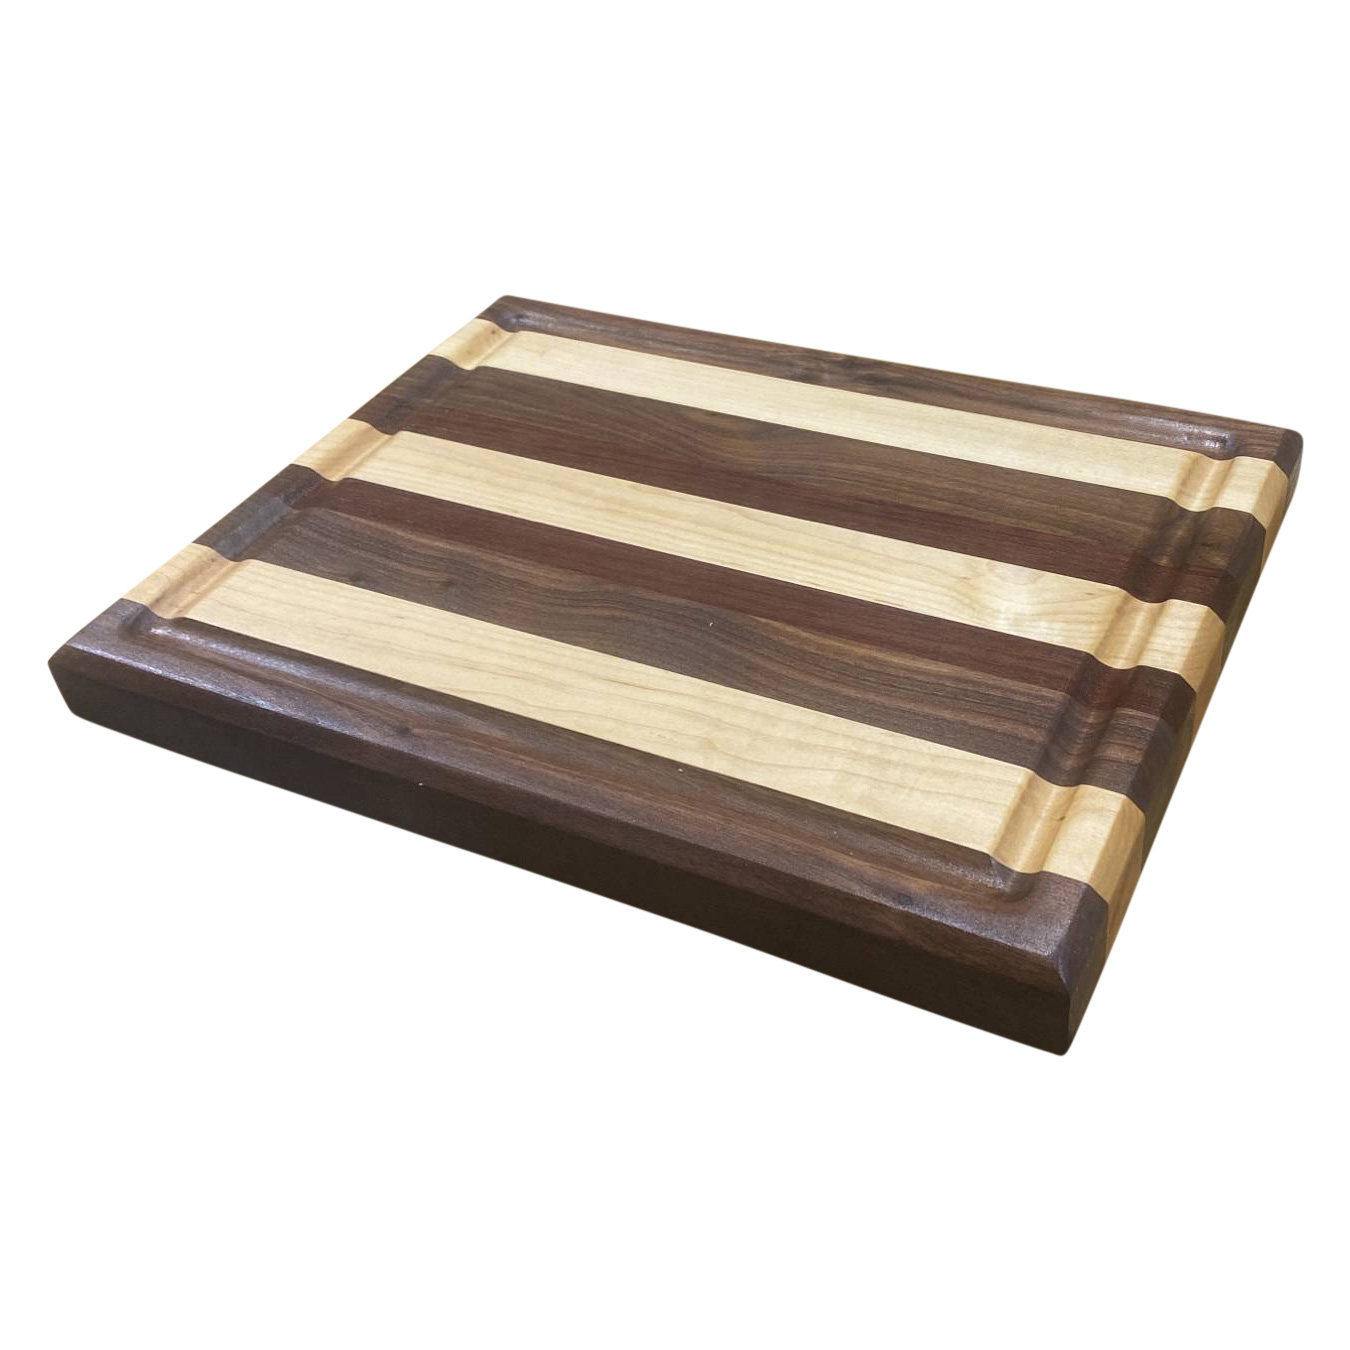 https://smwdesigns.net/wp-content/uploads/2020/10/thick-maple-walnut-and-purple-heart-rectangle-cutting-board.jpg